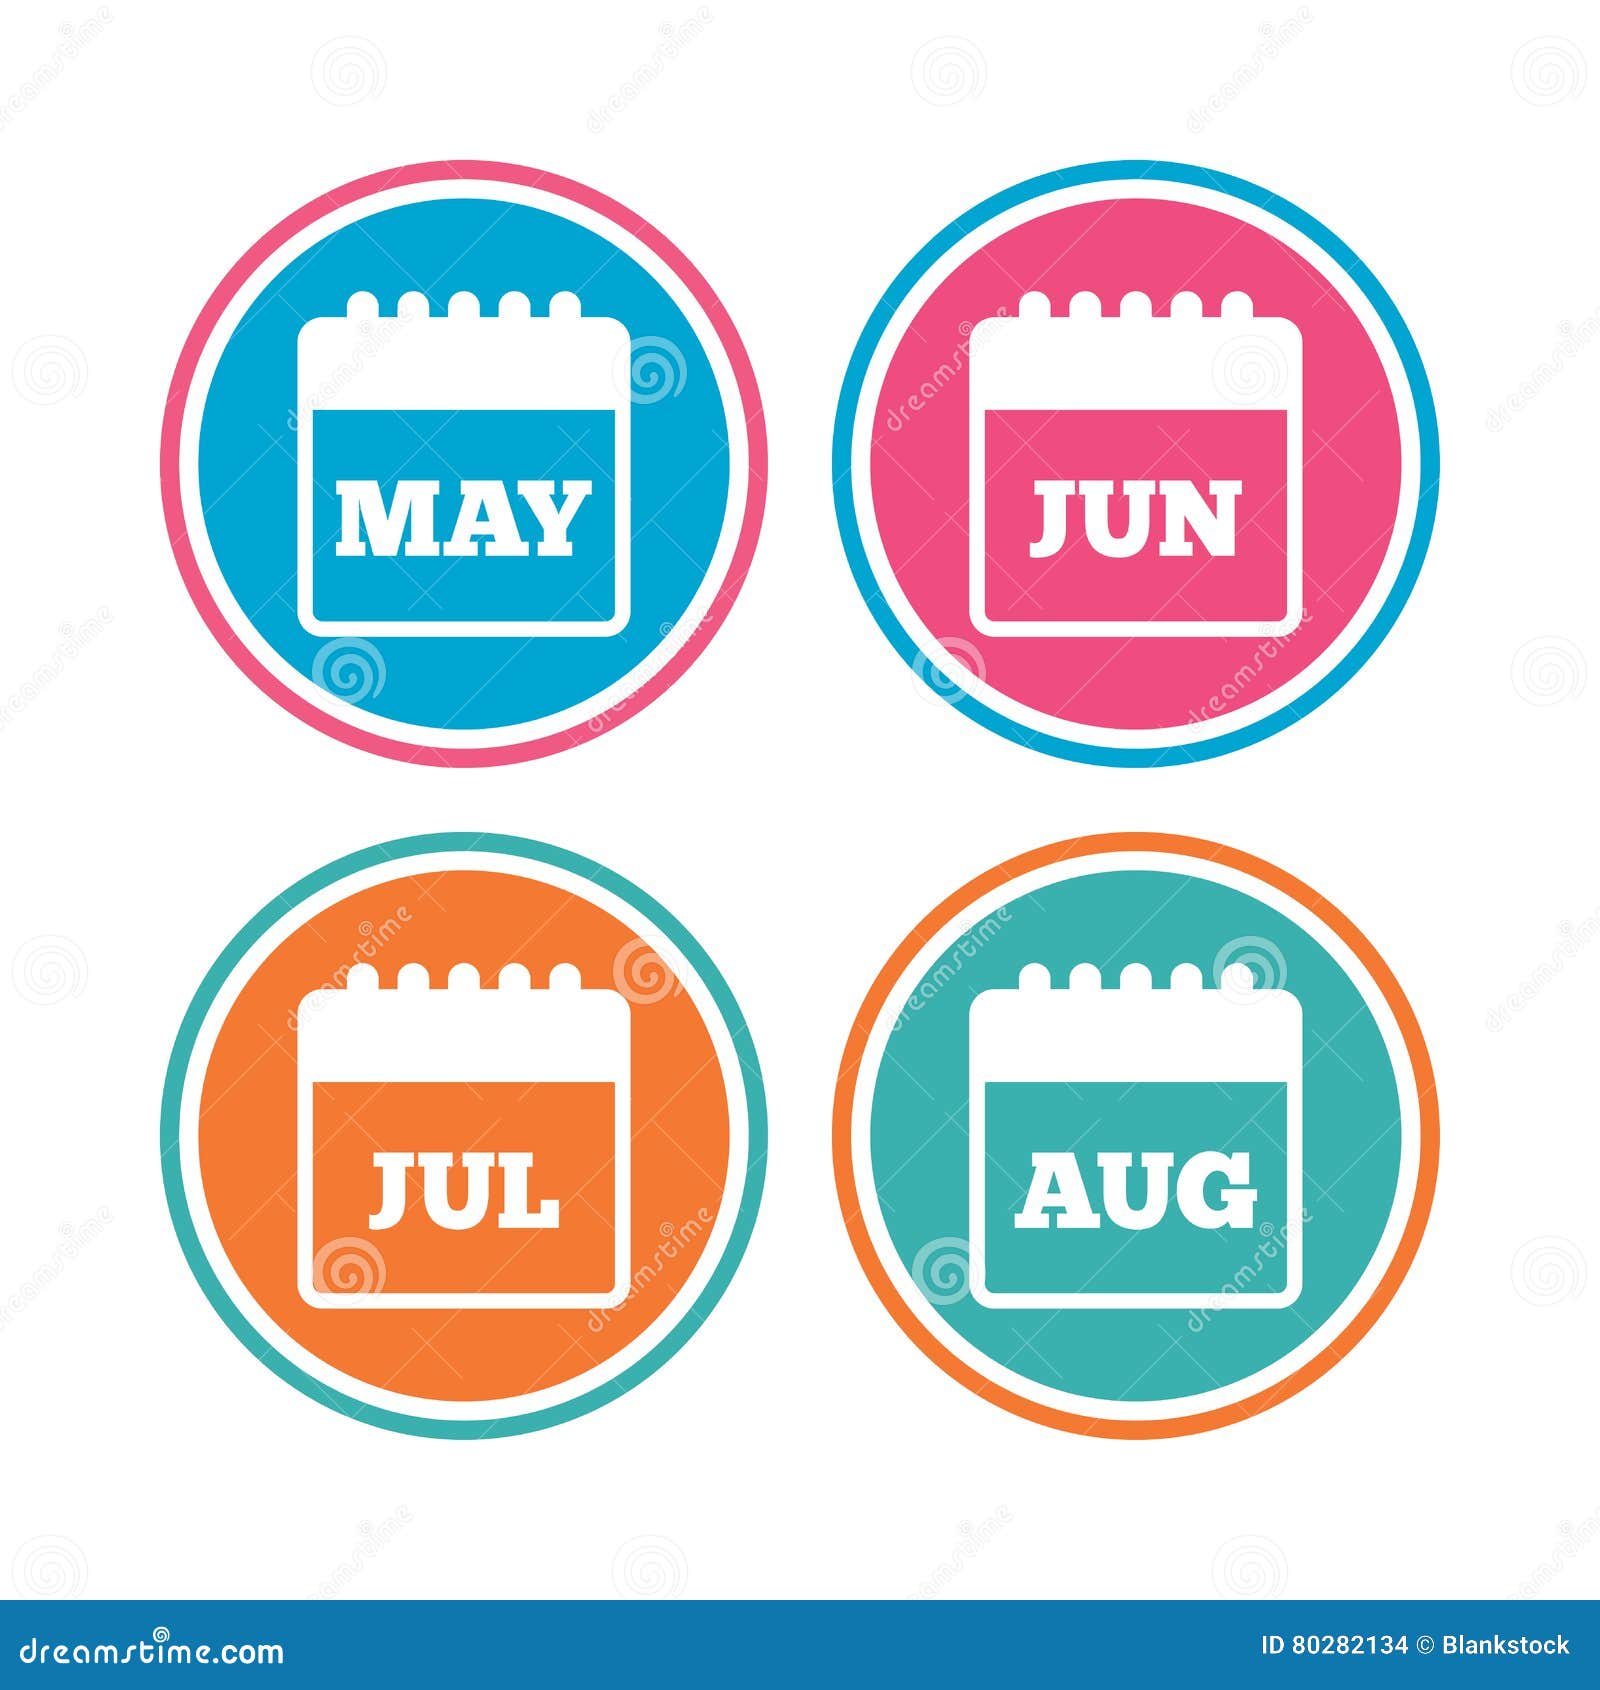 Calendar May June July And August Stock Vector Illustration Of